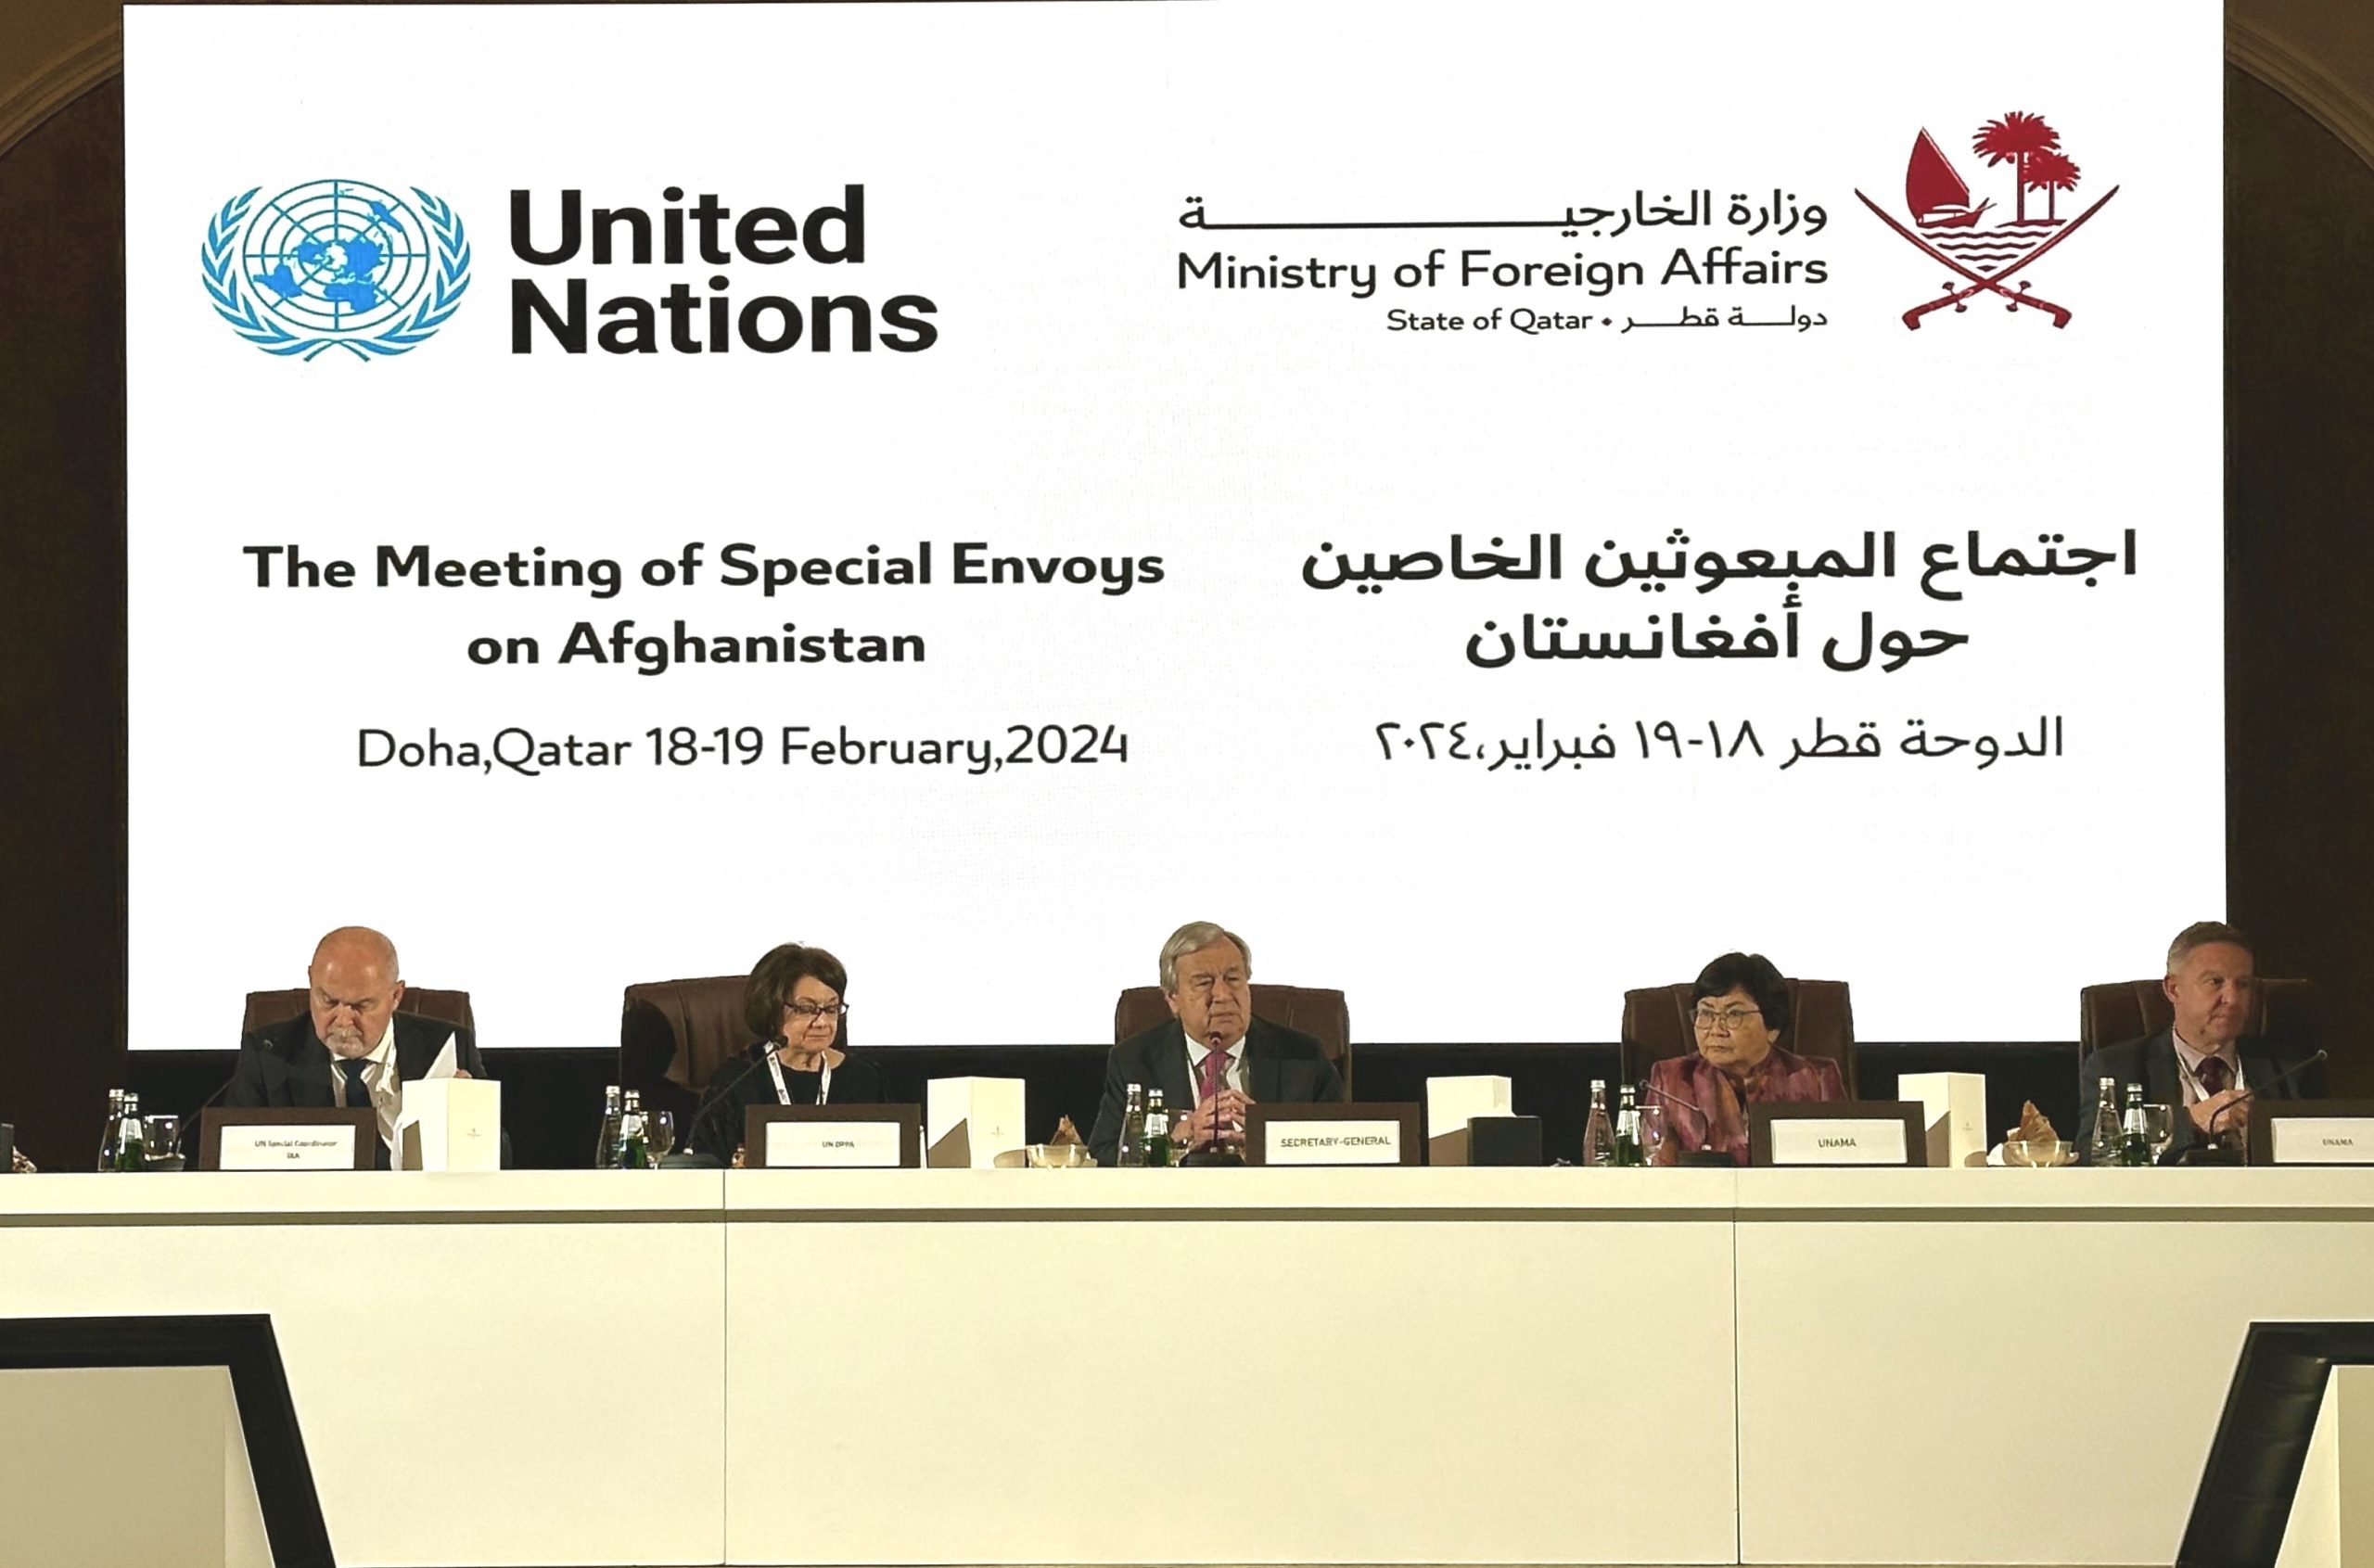 The opening session of the Special Envoys on Afghanistan in the Qatari capital Doha. Photo: State of Qatar Ministry of Foreign Affairs, 18 February 2024